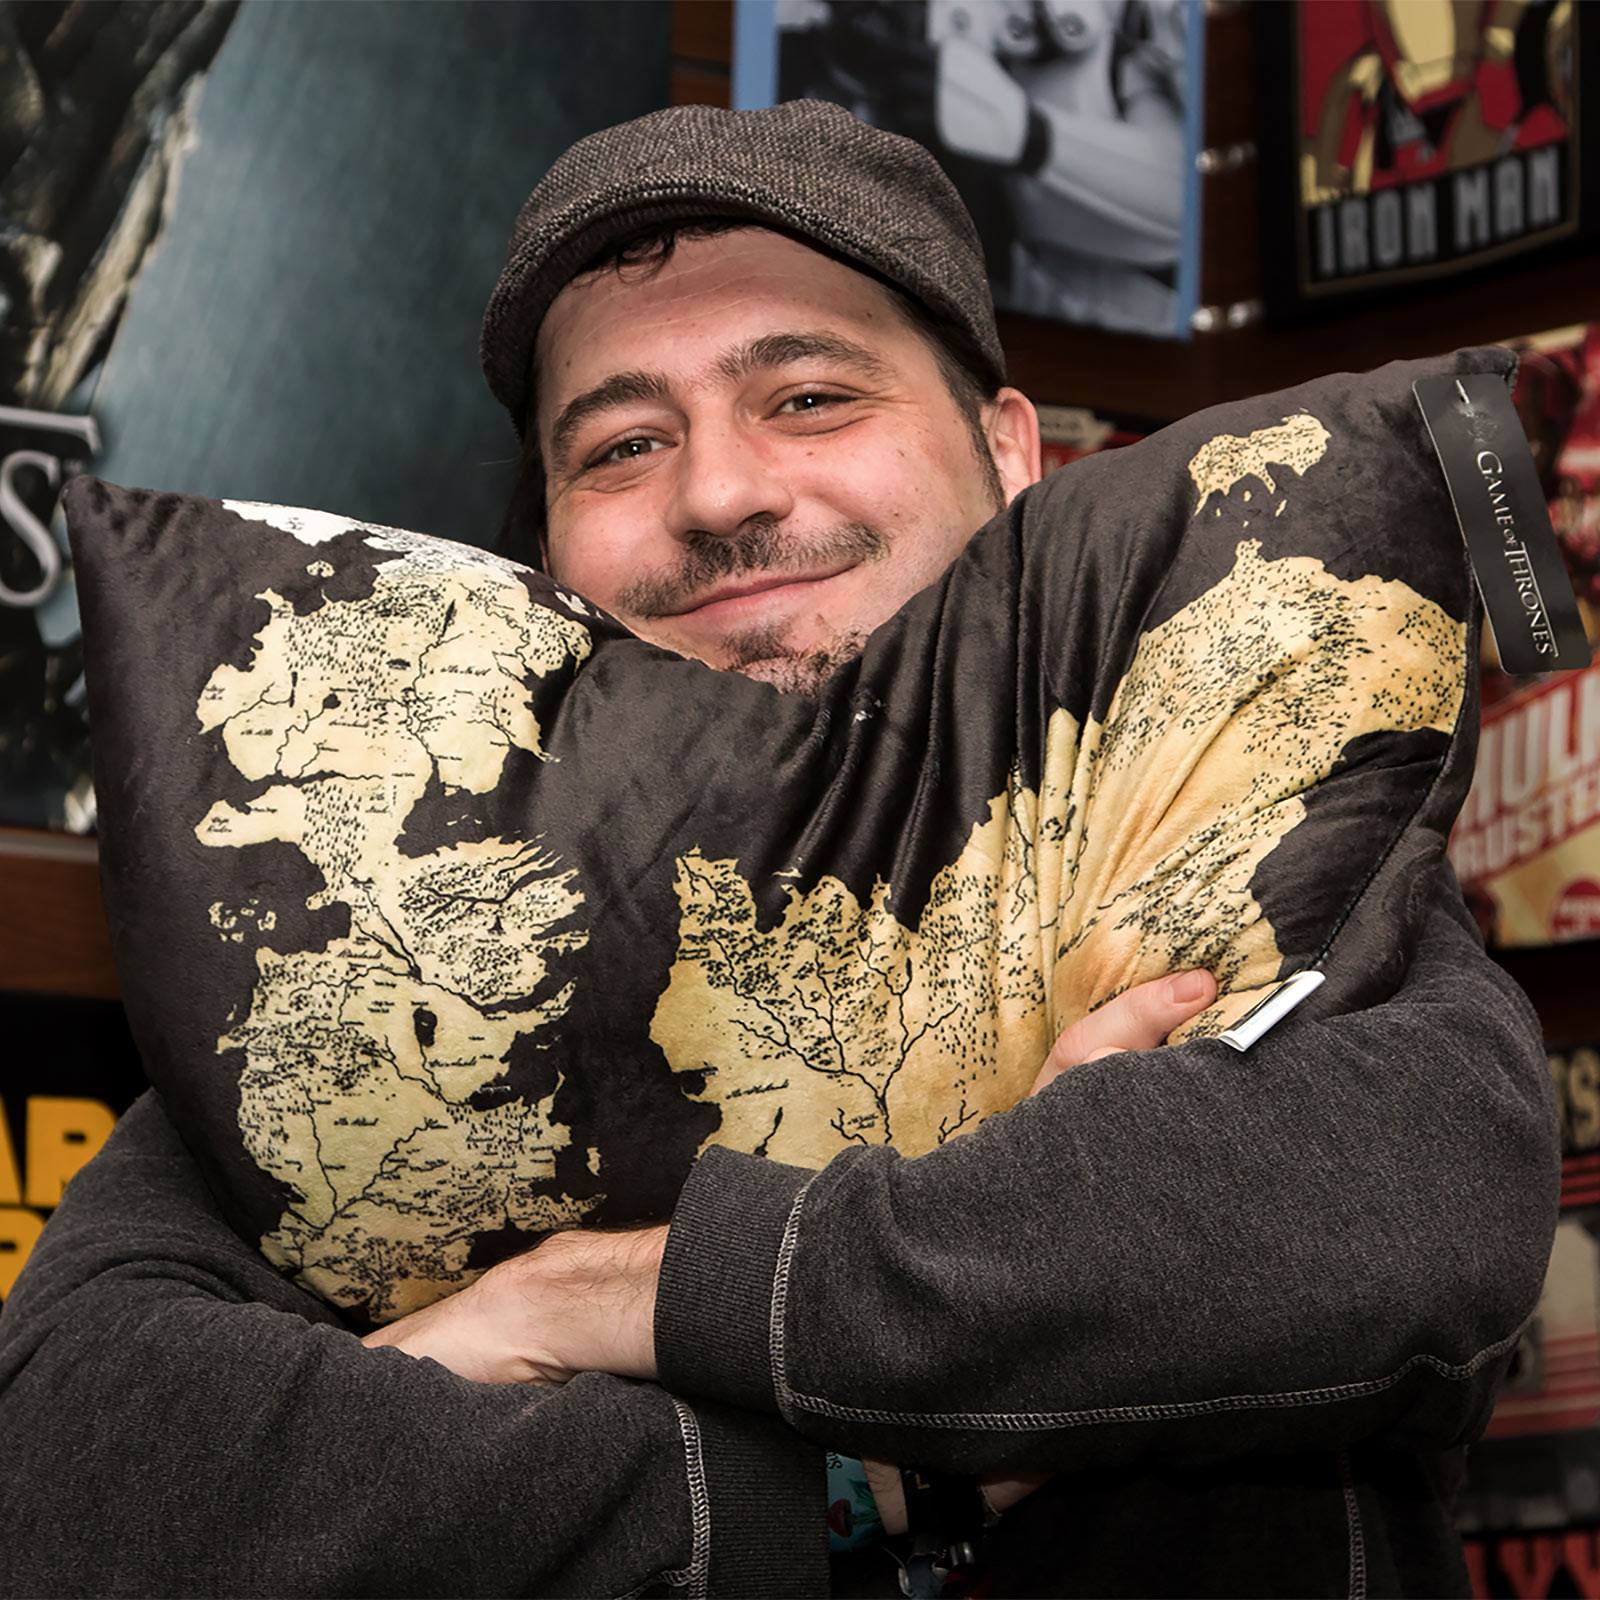 Game of Thrones - Westeros and Essos Pillow